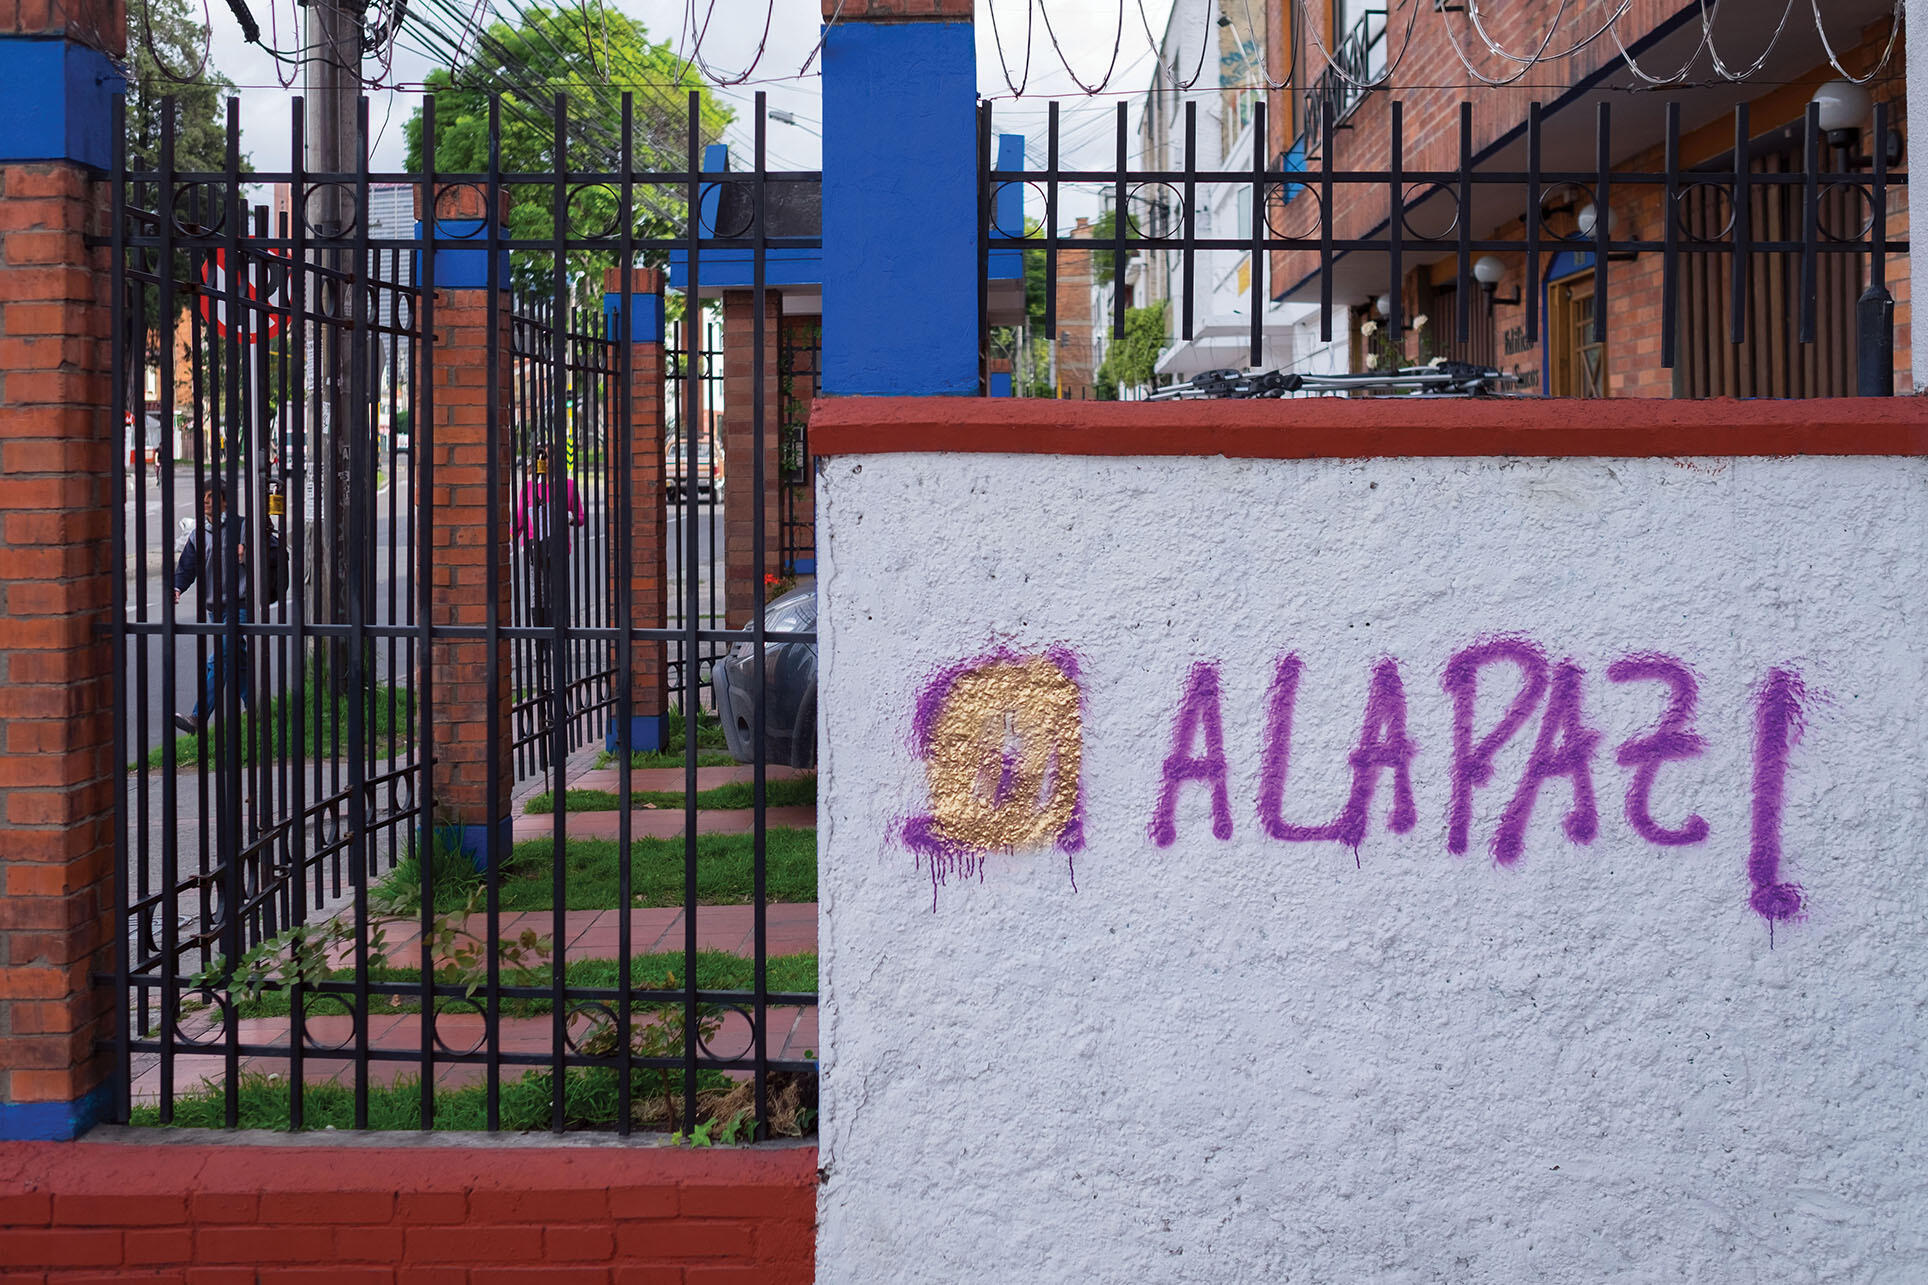 Graffiti in Colombia after the failure of the plebiscite reads "Si a la paz" with the "si" marred by different paint. (Photo by Galo Naranjo.)